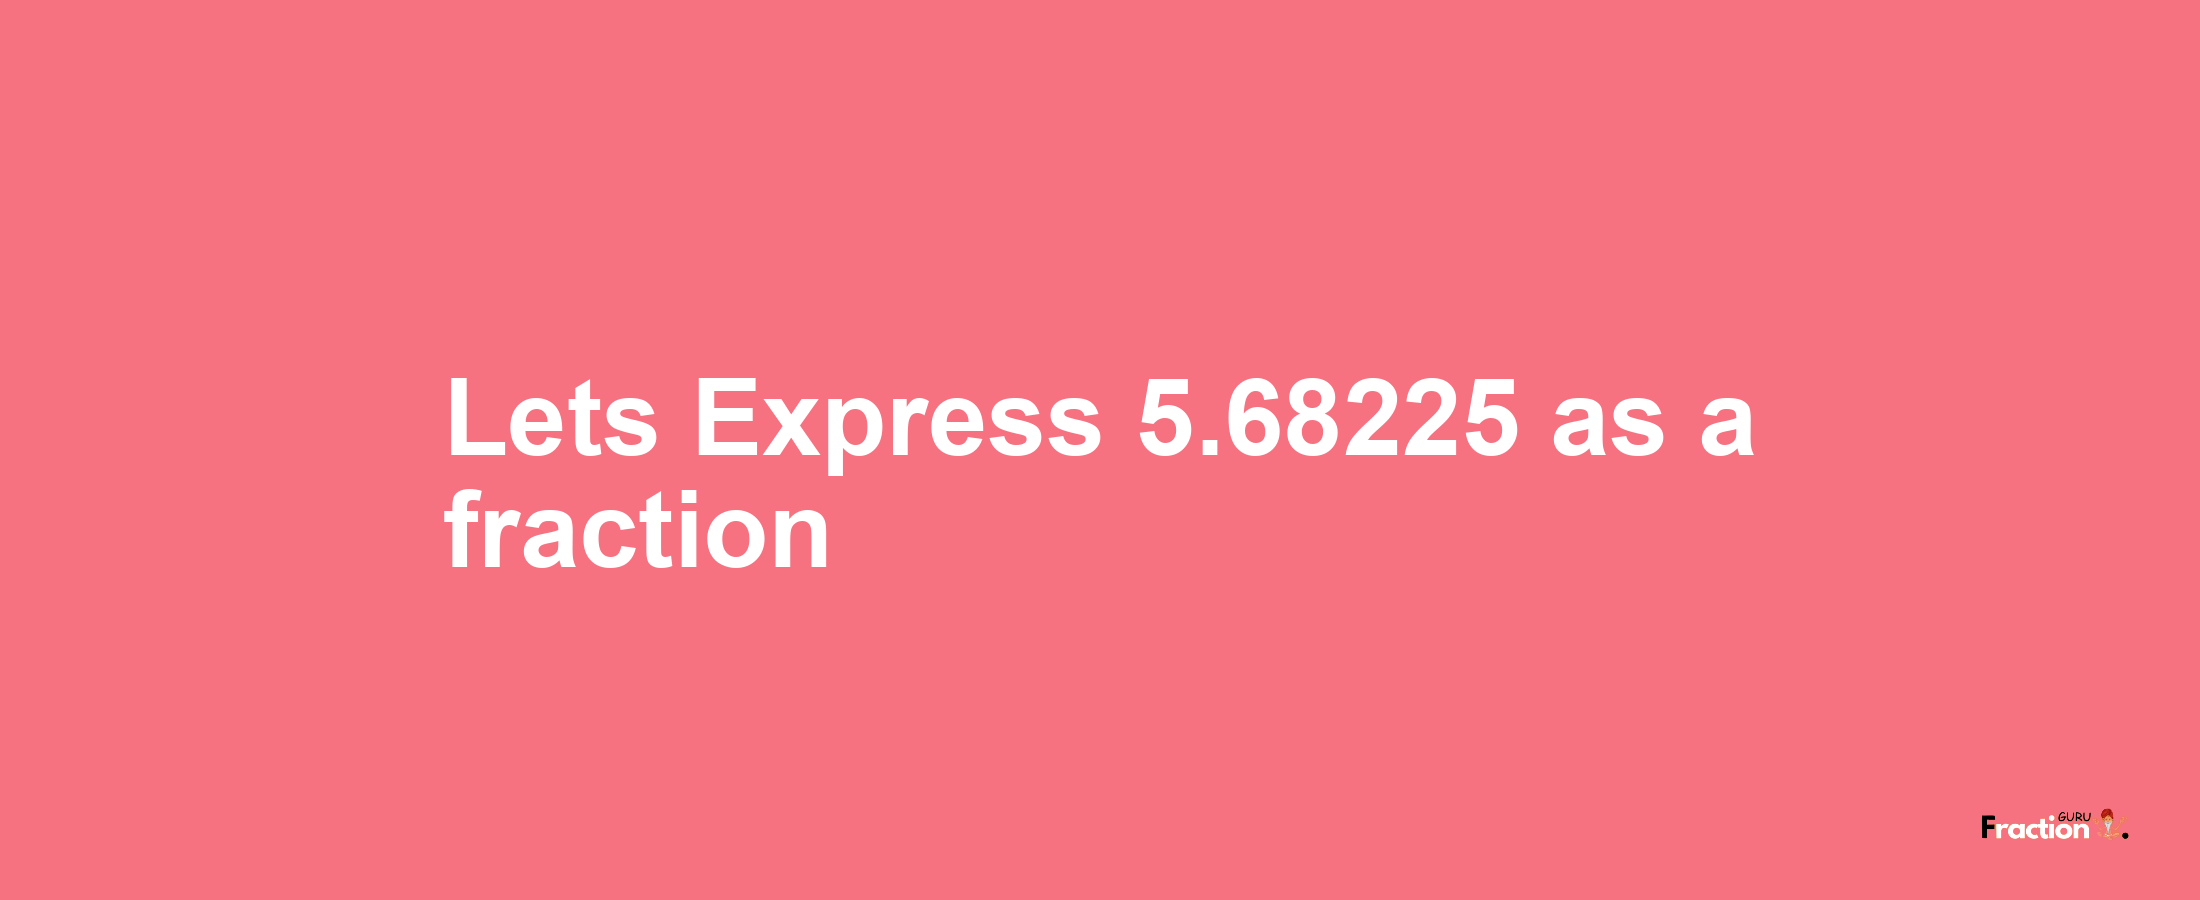 Lets Express 5.68225 as afraction